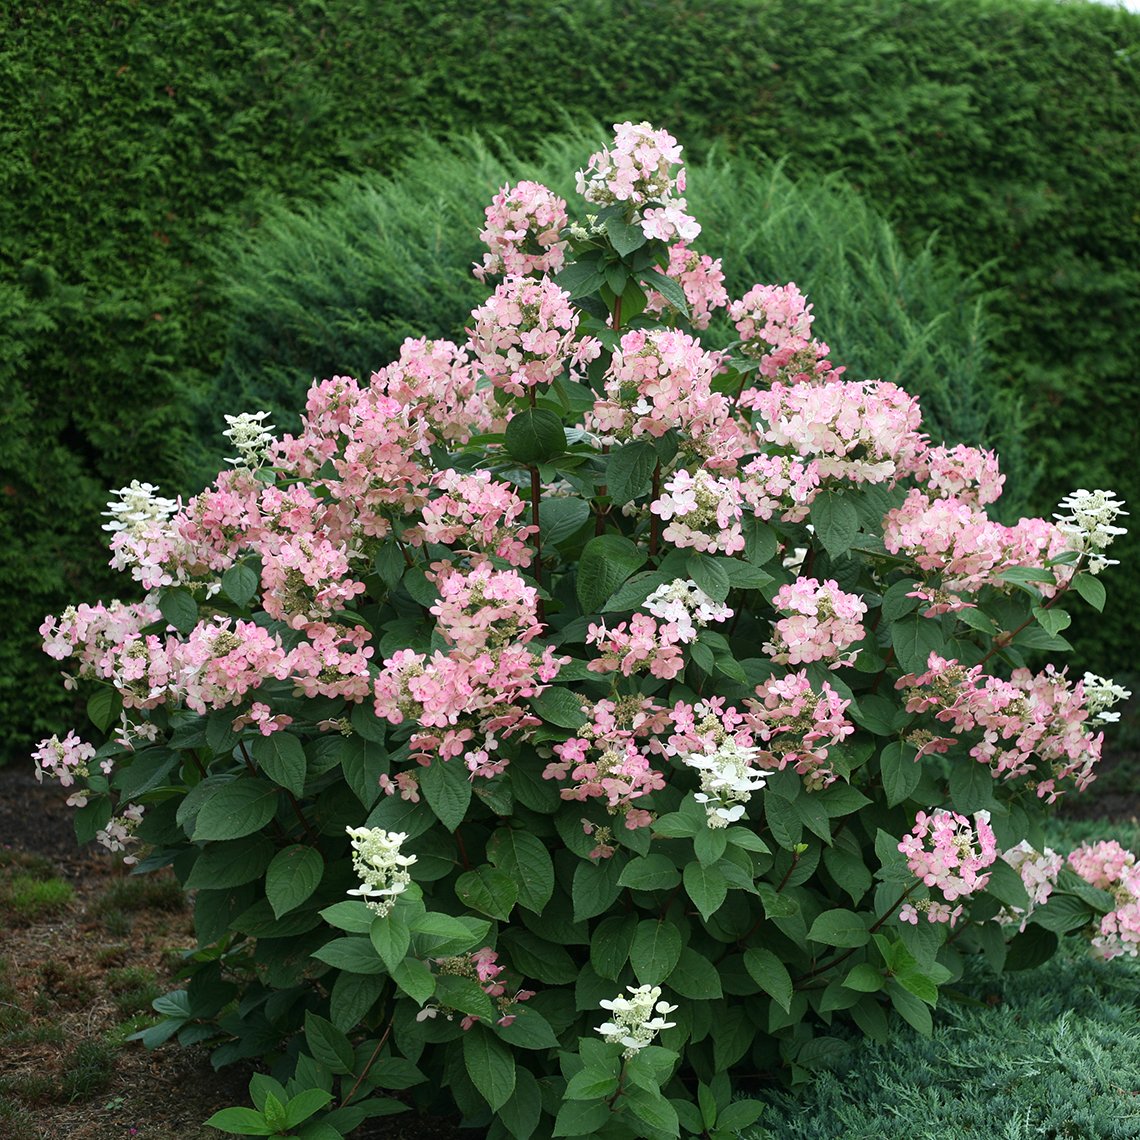 Hydrangea Quick Fire shrub with pink blooms in autumn.